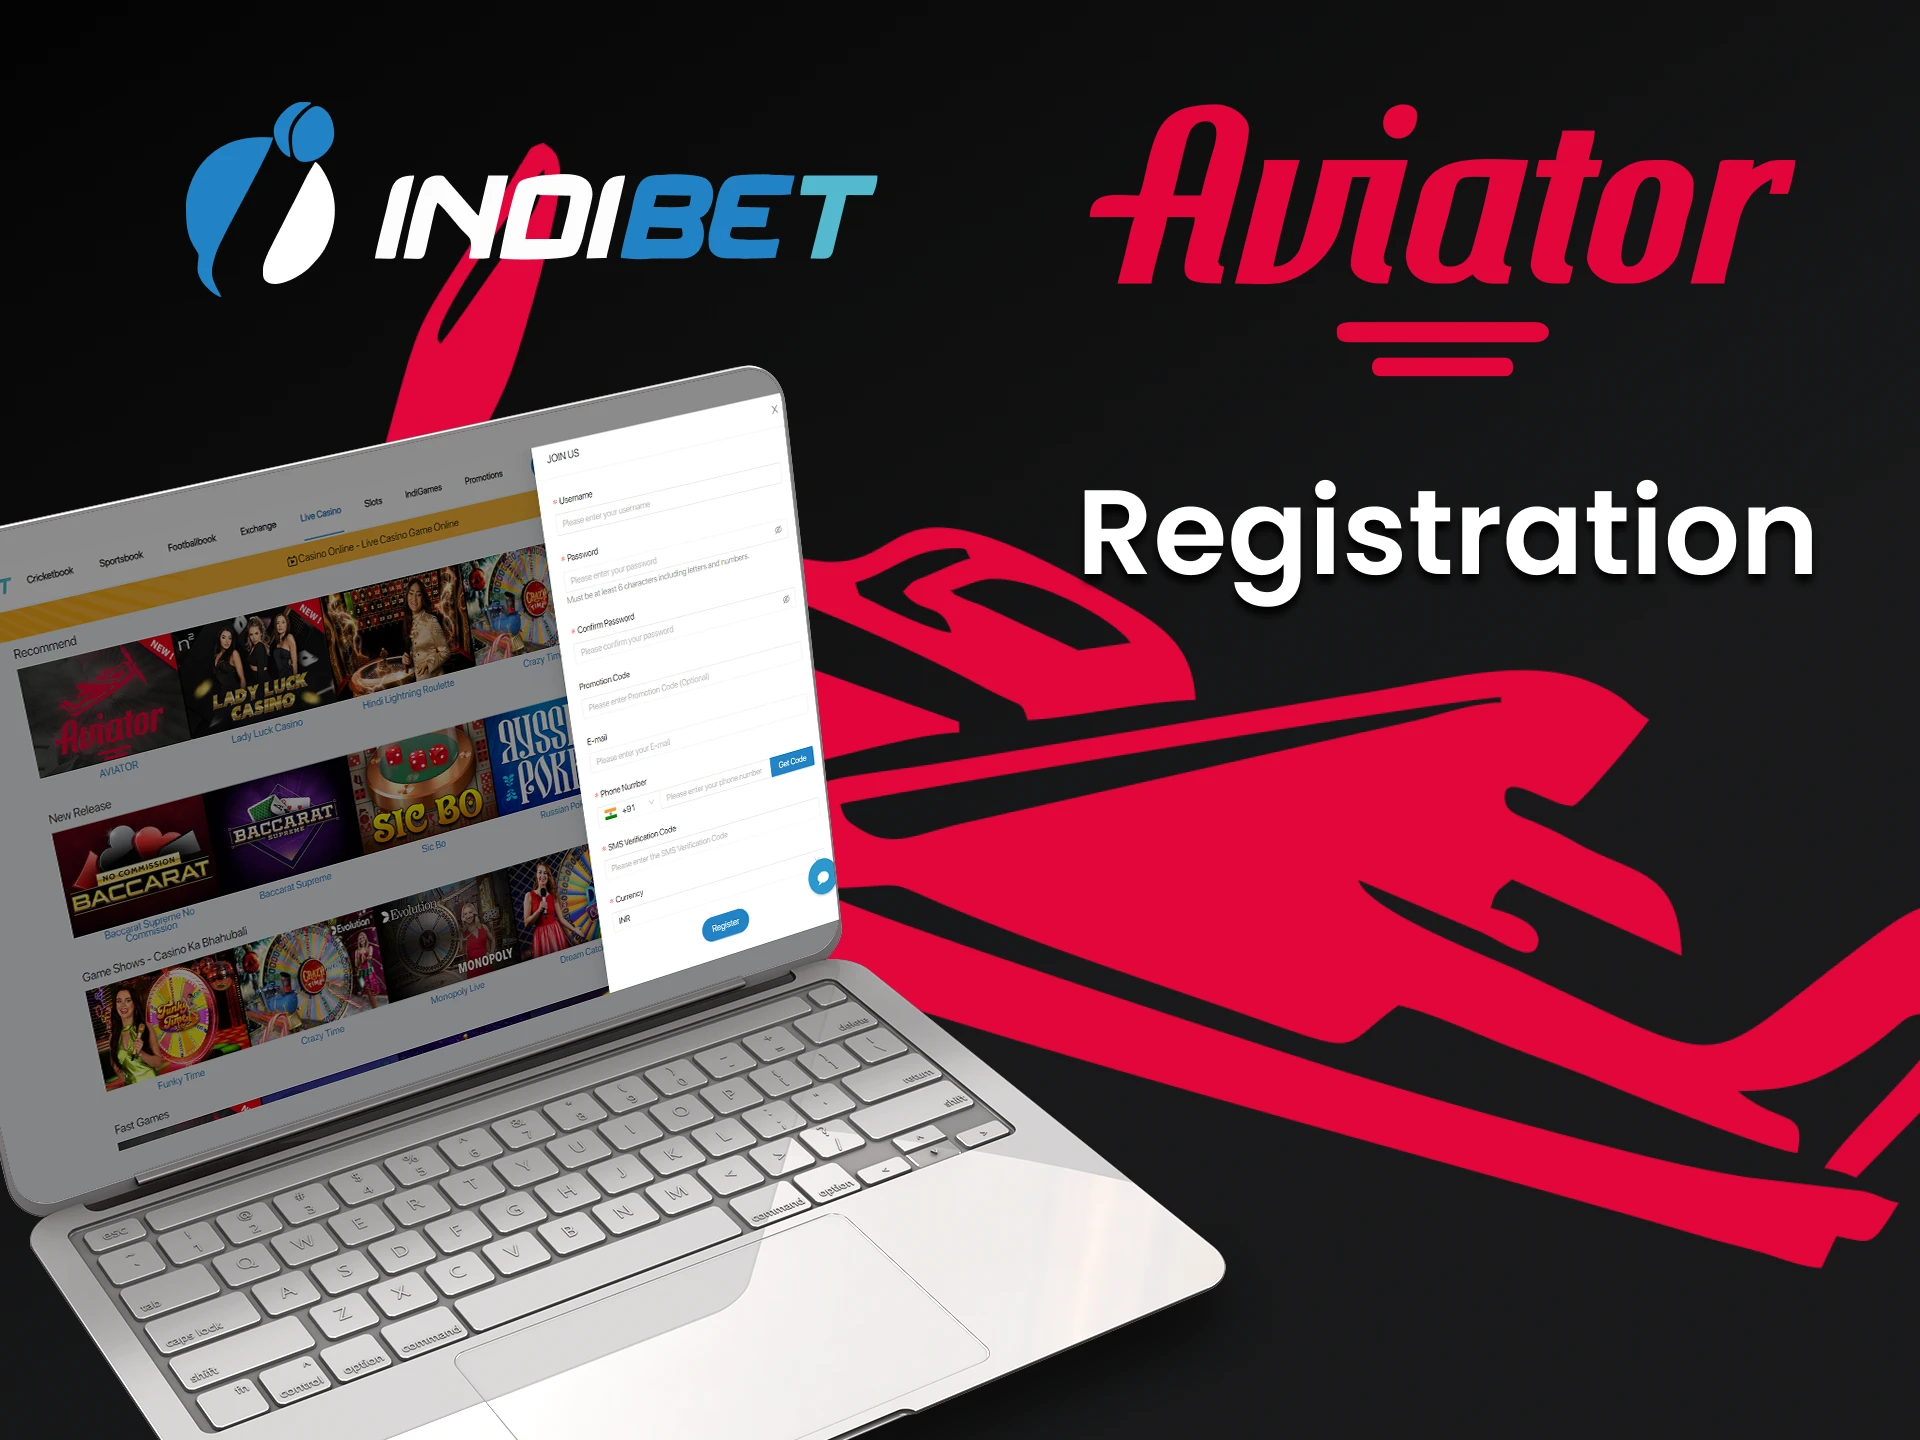 Create a personal account on Indibet to play Aviator.